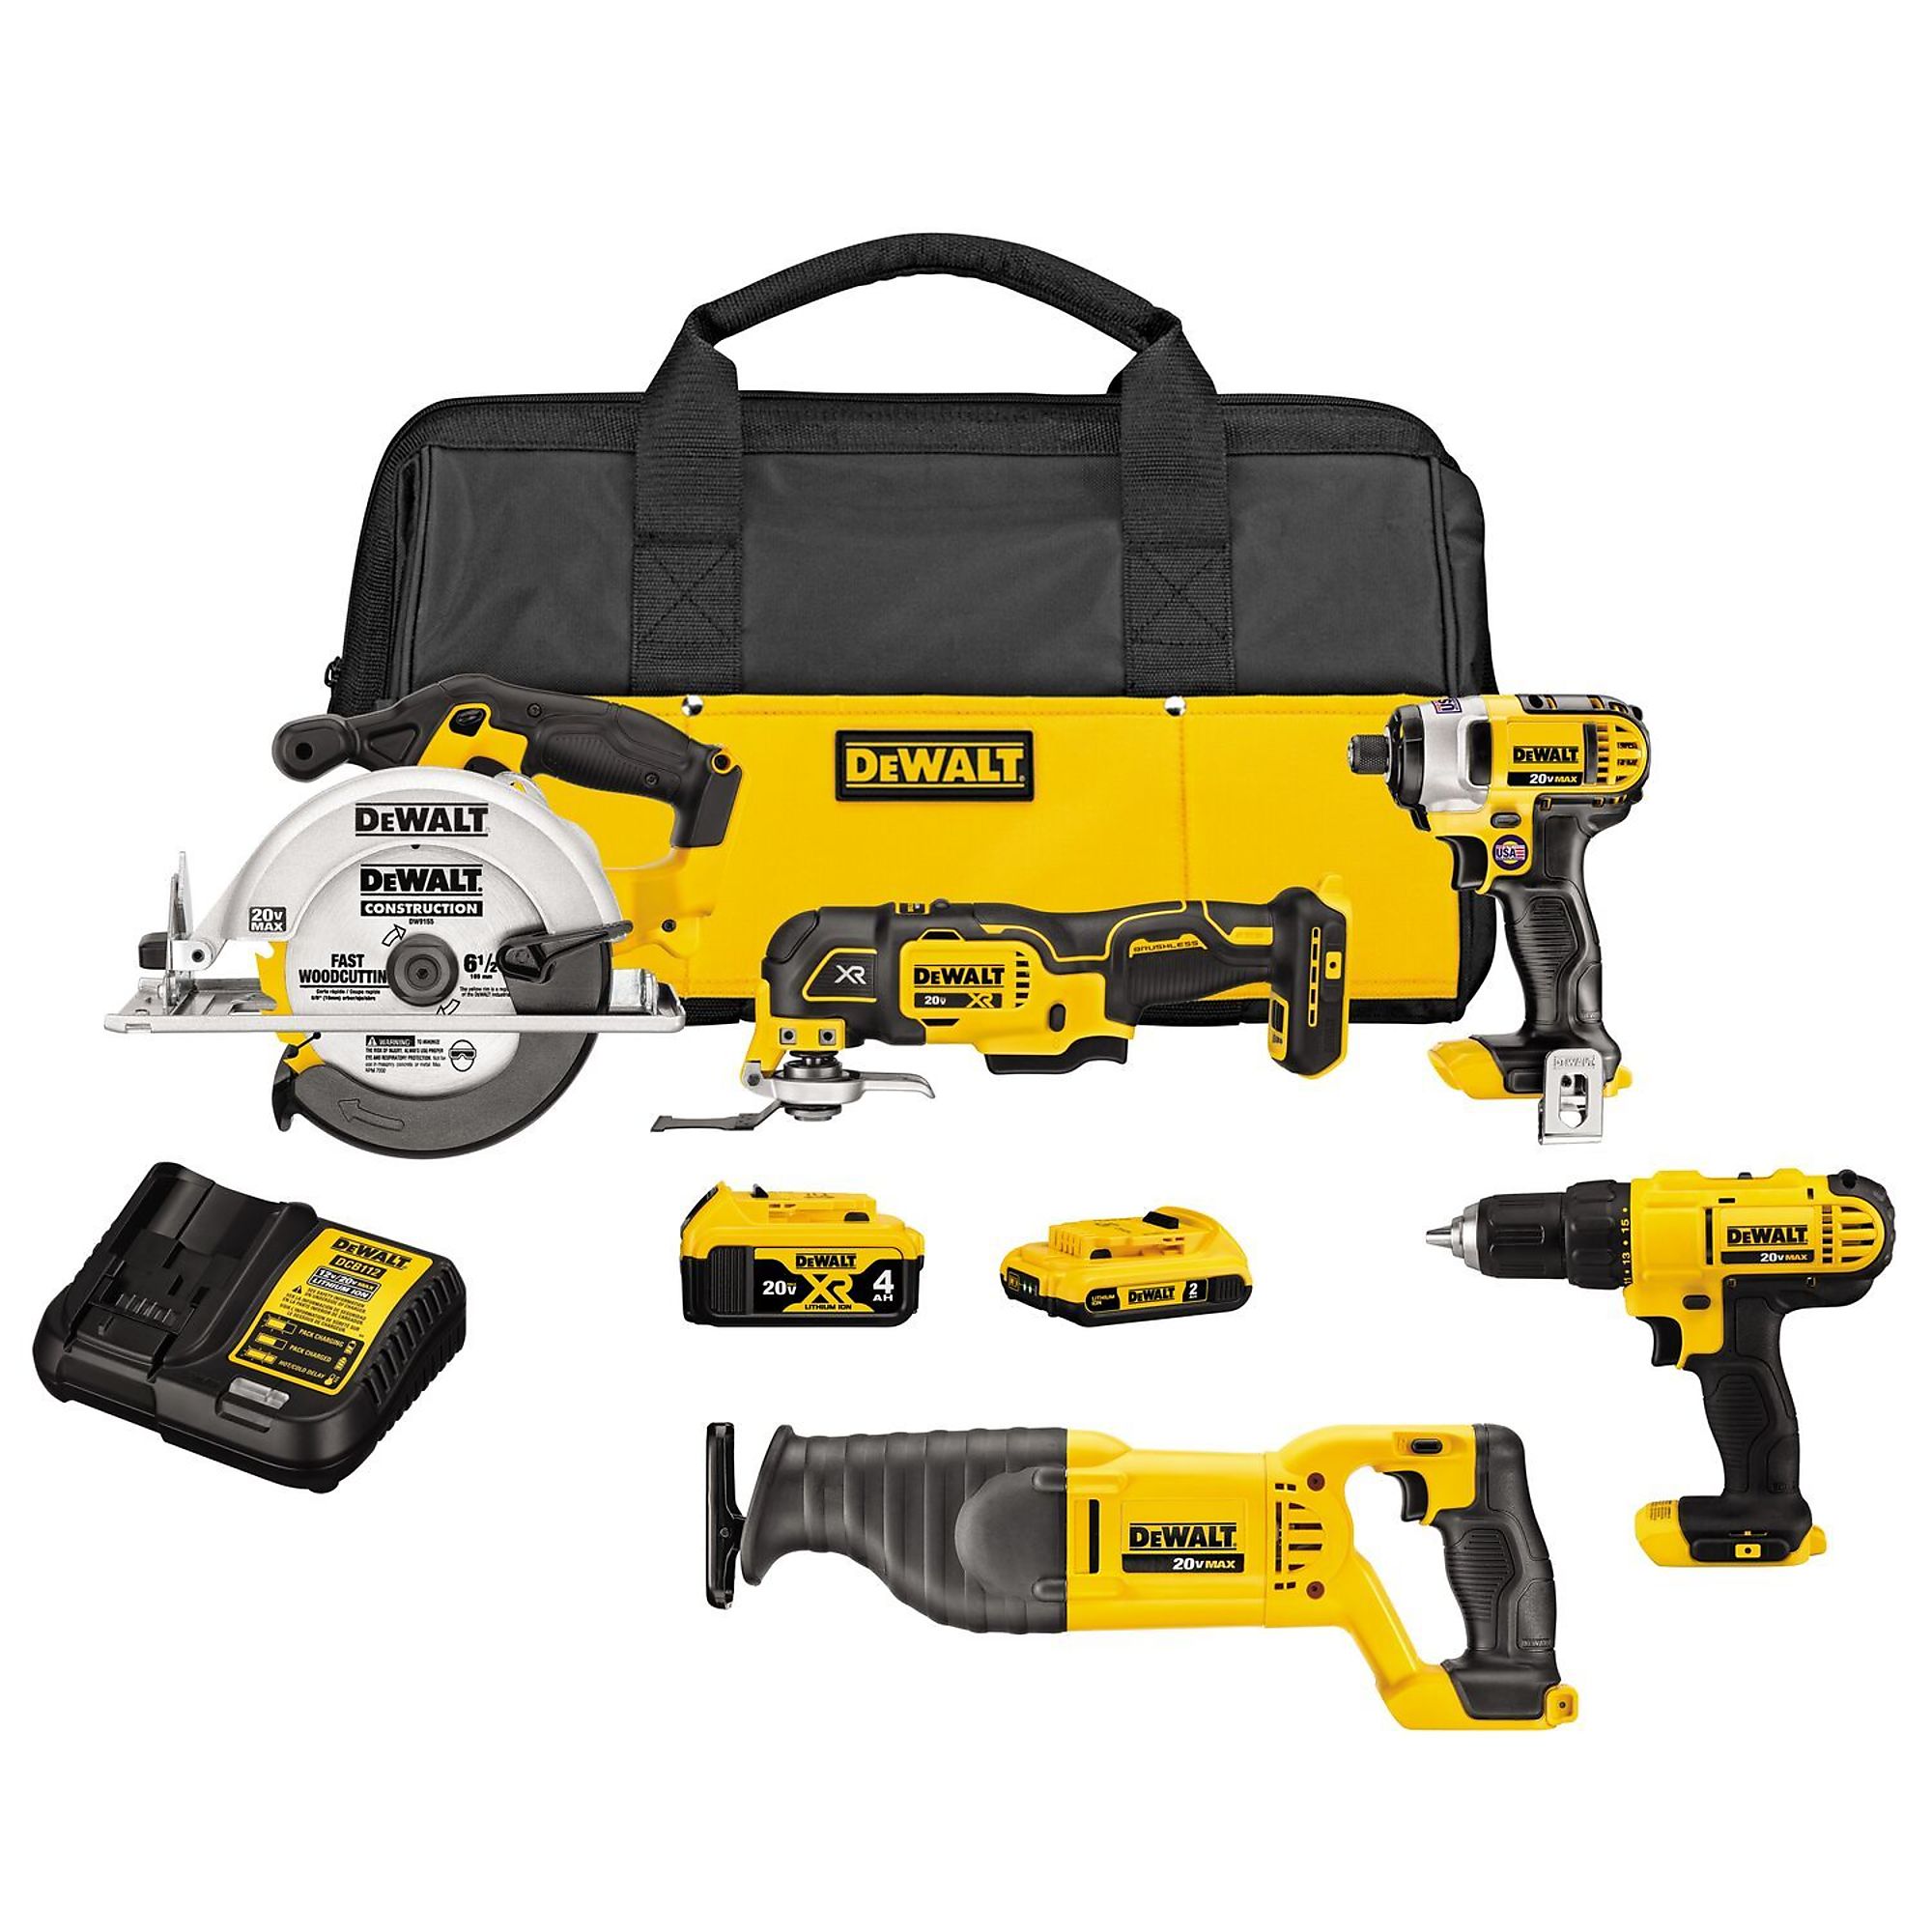 DEWALT, 20V MAX* Cordless 5-Tool Combo Kit, Chuck Size 1/2 in, Drive Size 1/4 in, Tools Included (qty.) 5 Model DCK551D1M1